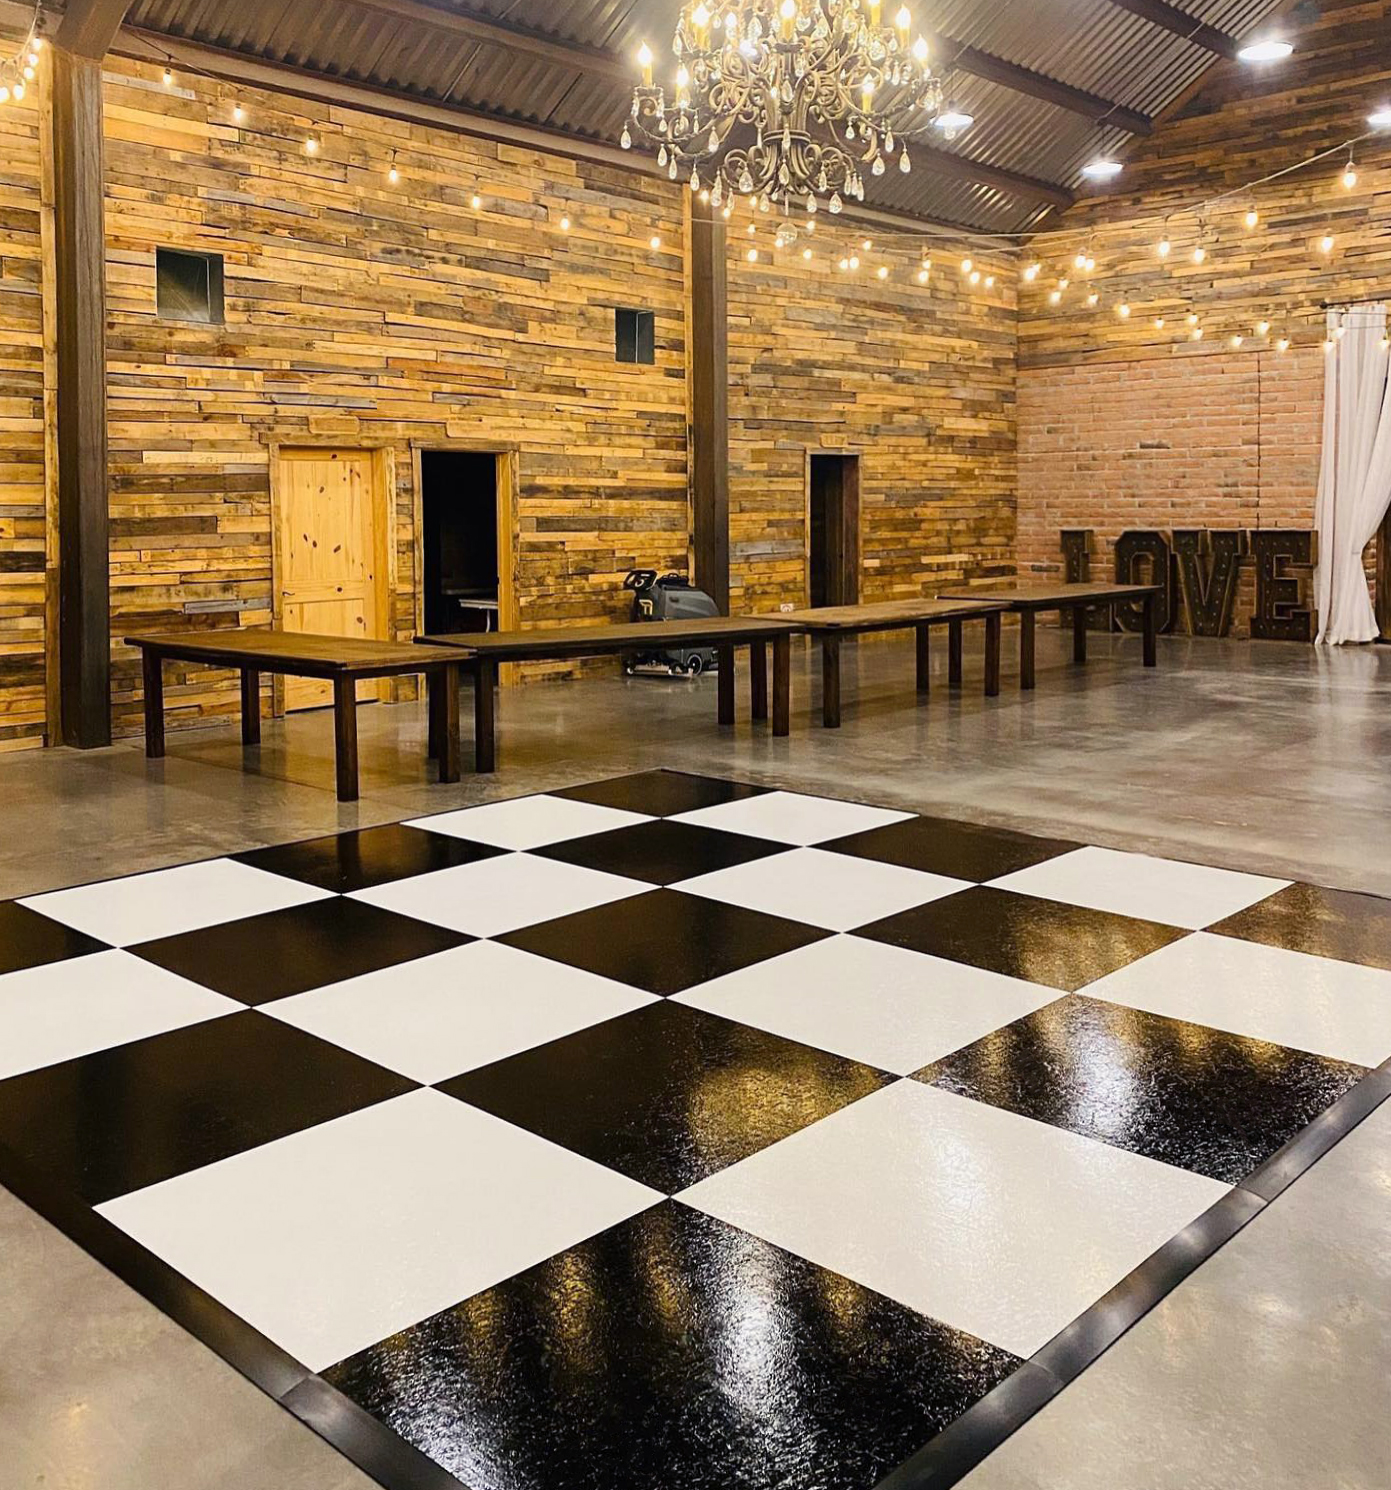 Slate black and white plus style dance floor in barn with chandelier